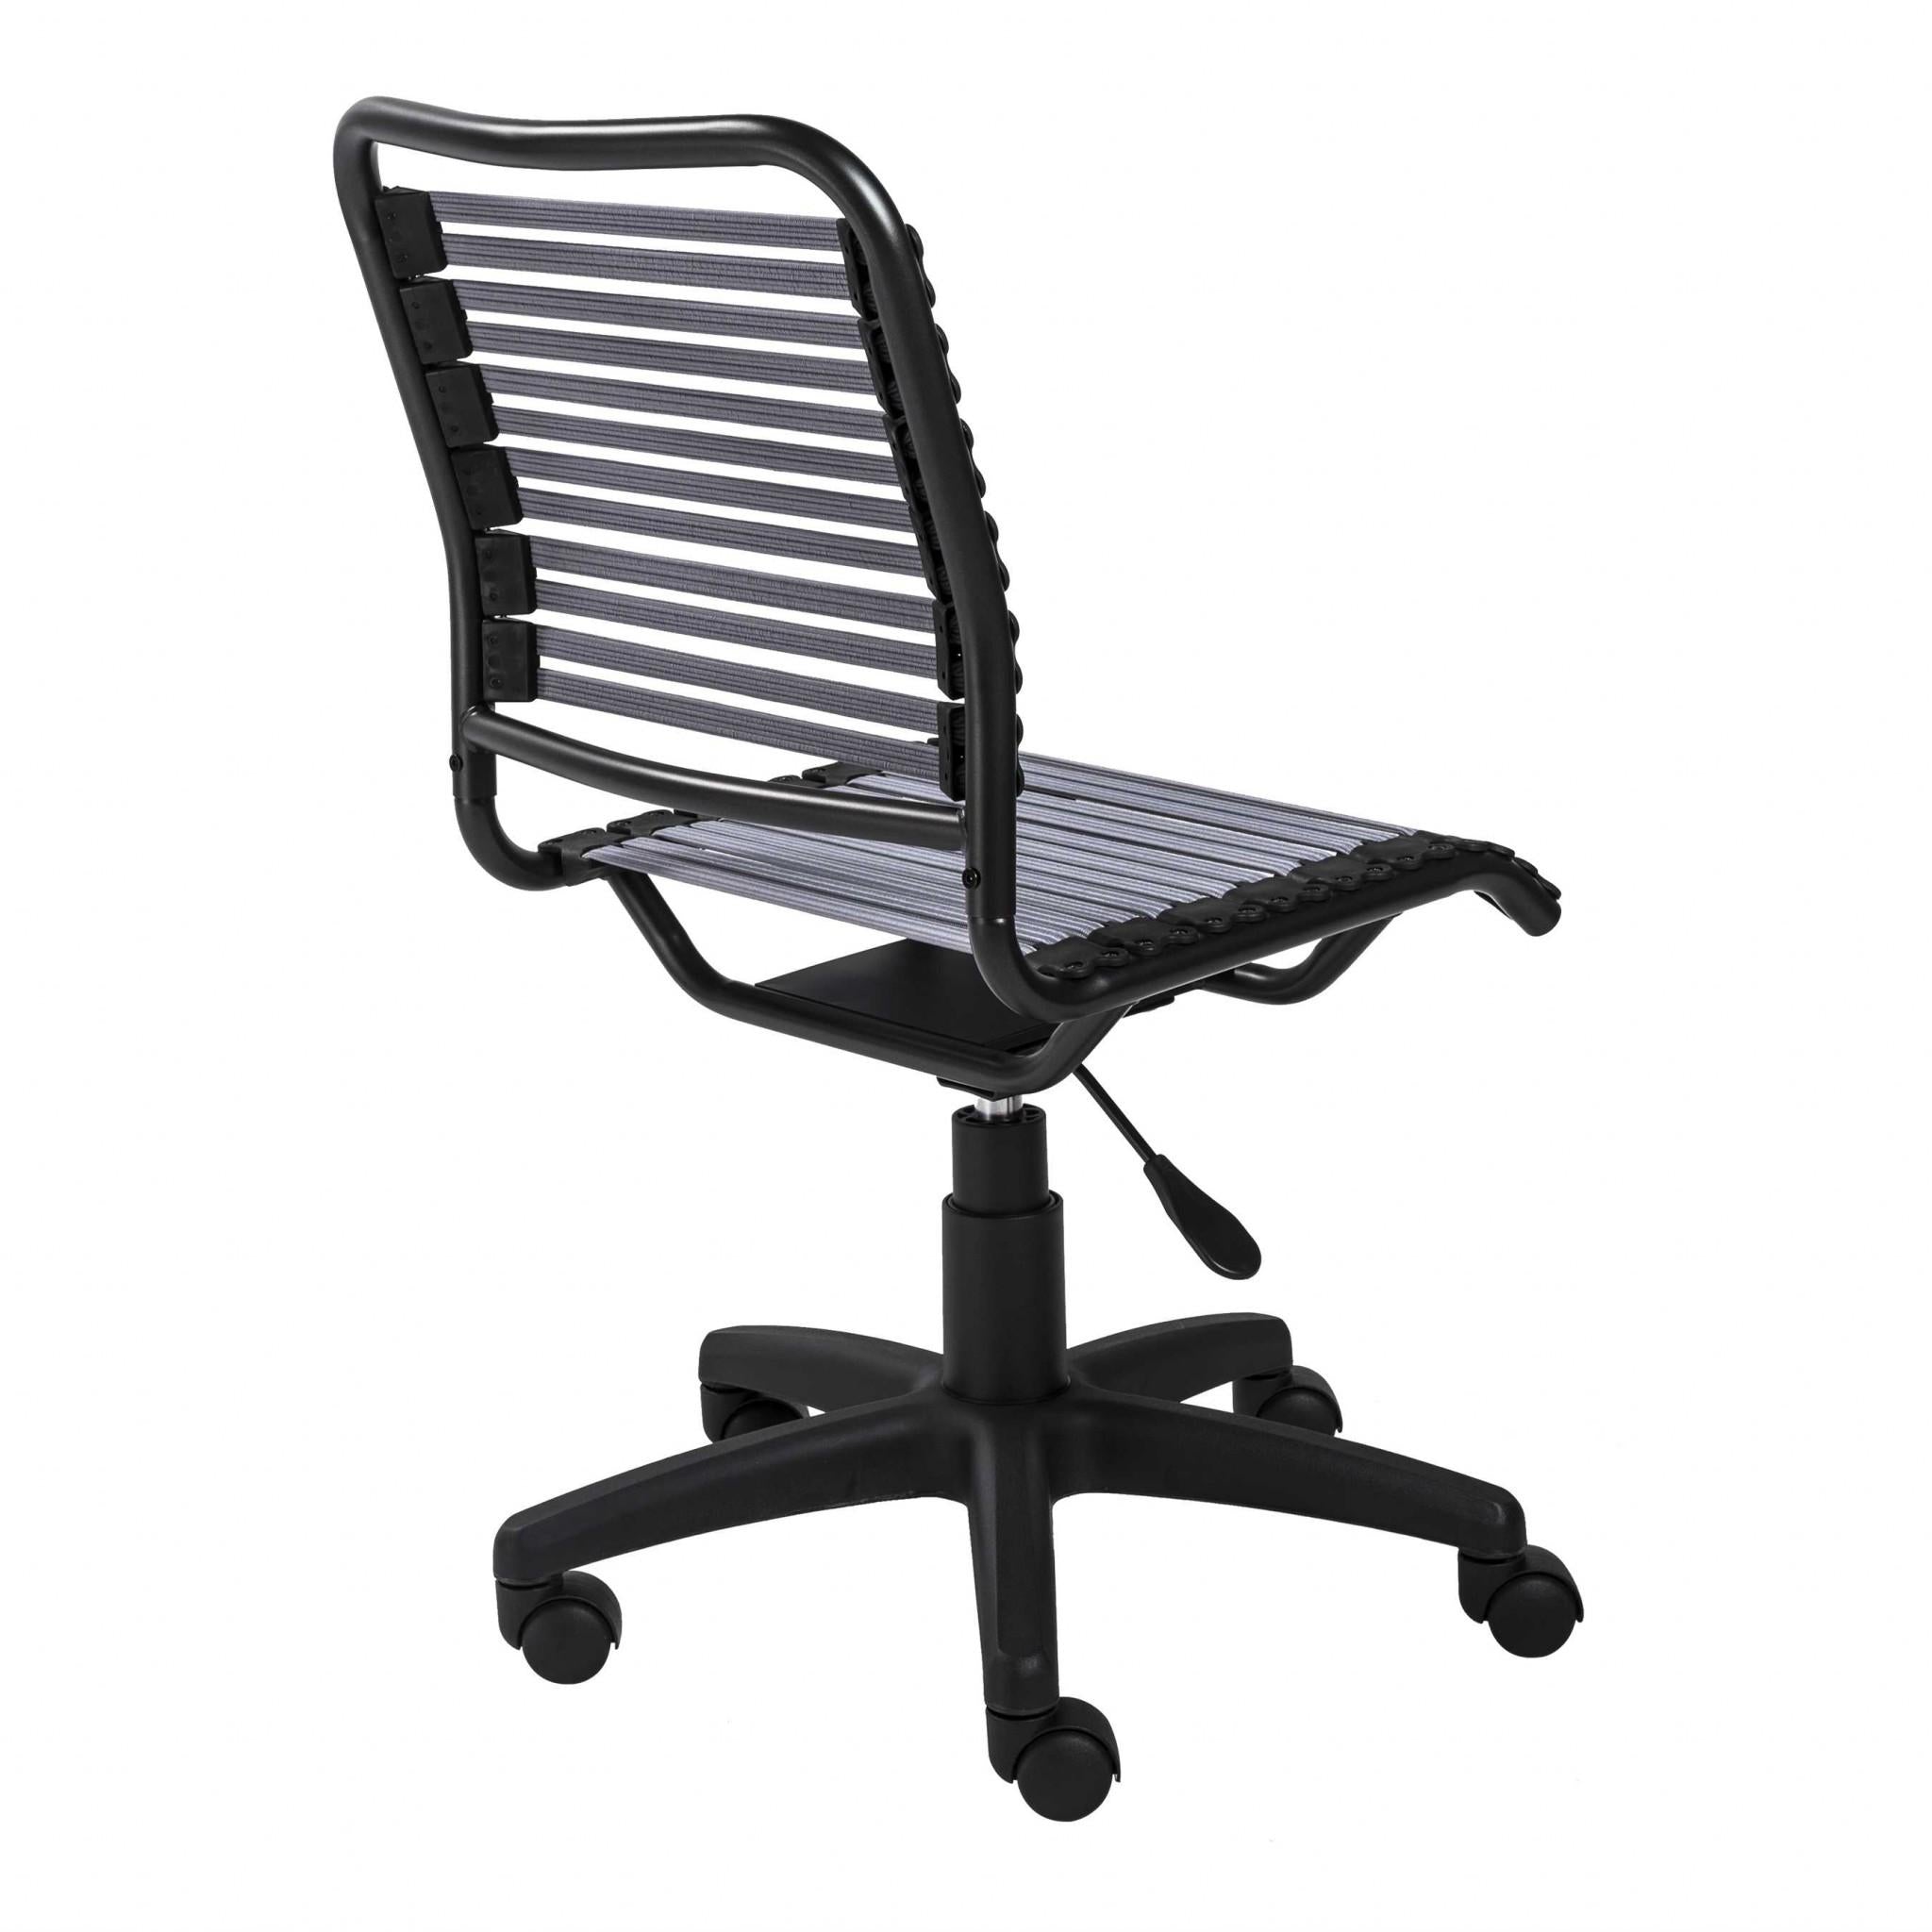 Gray Flat Bungie Cord Low Back Rolling Office Chair